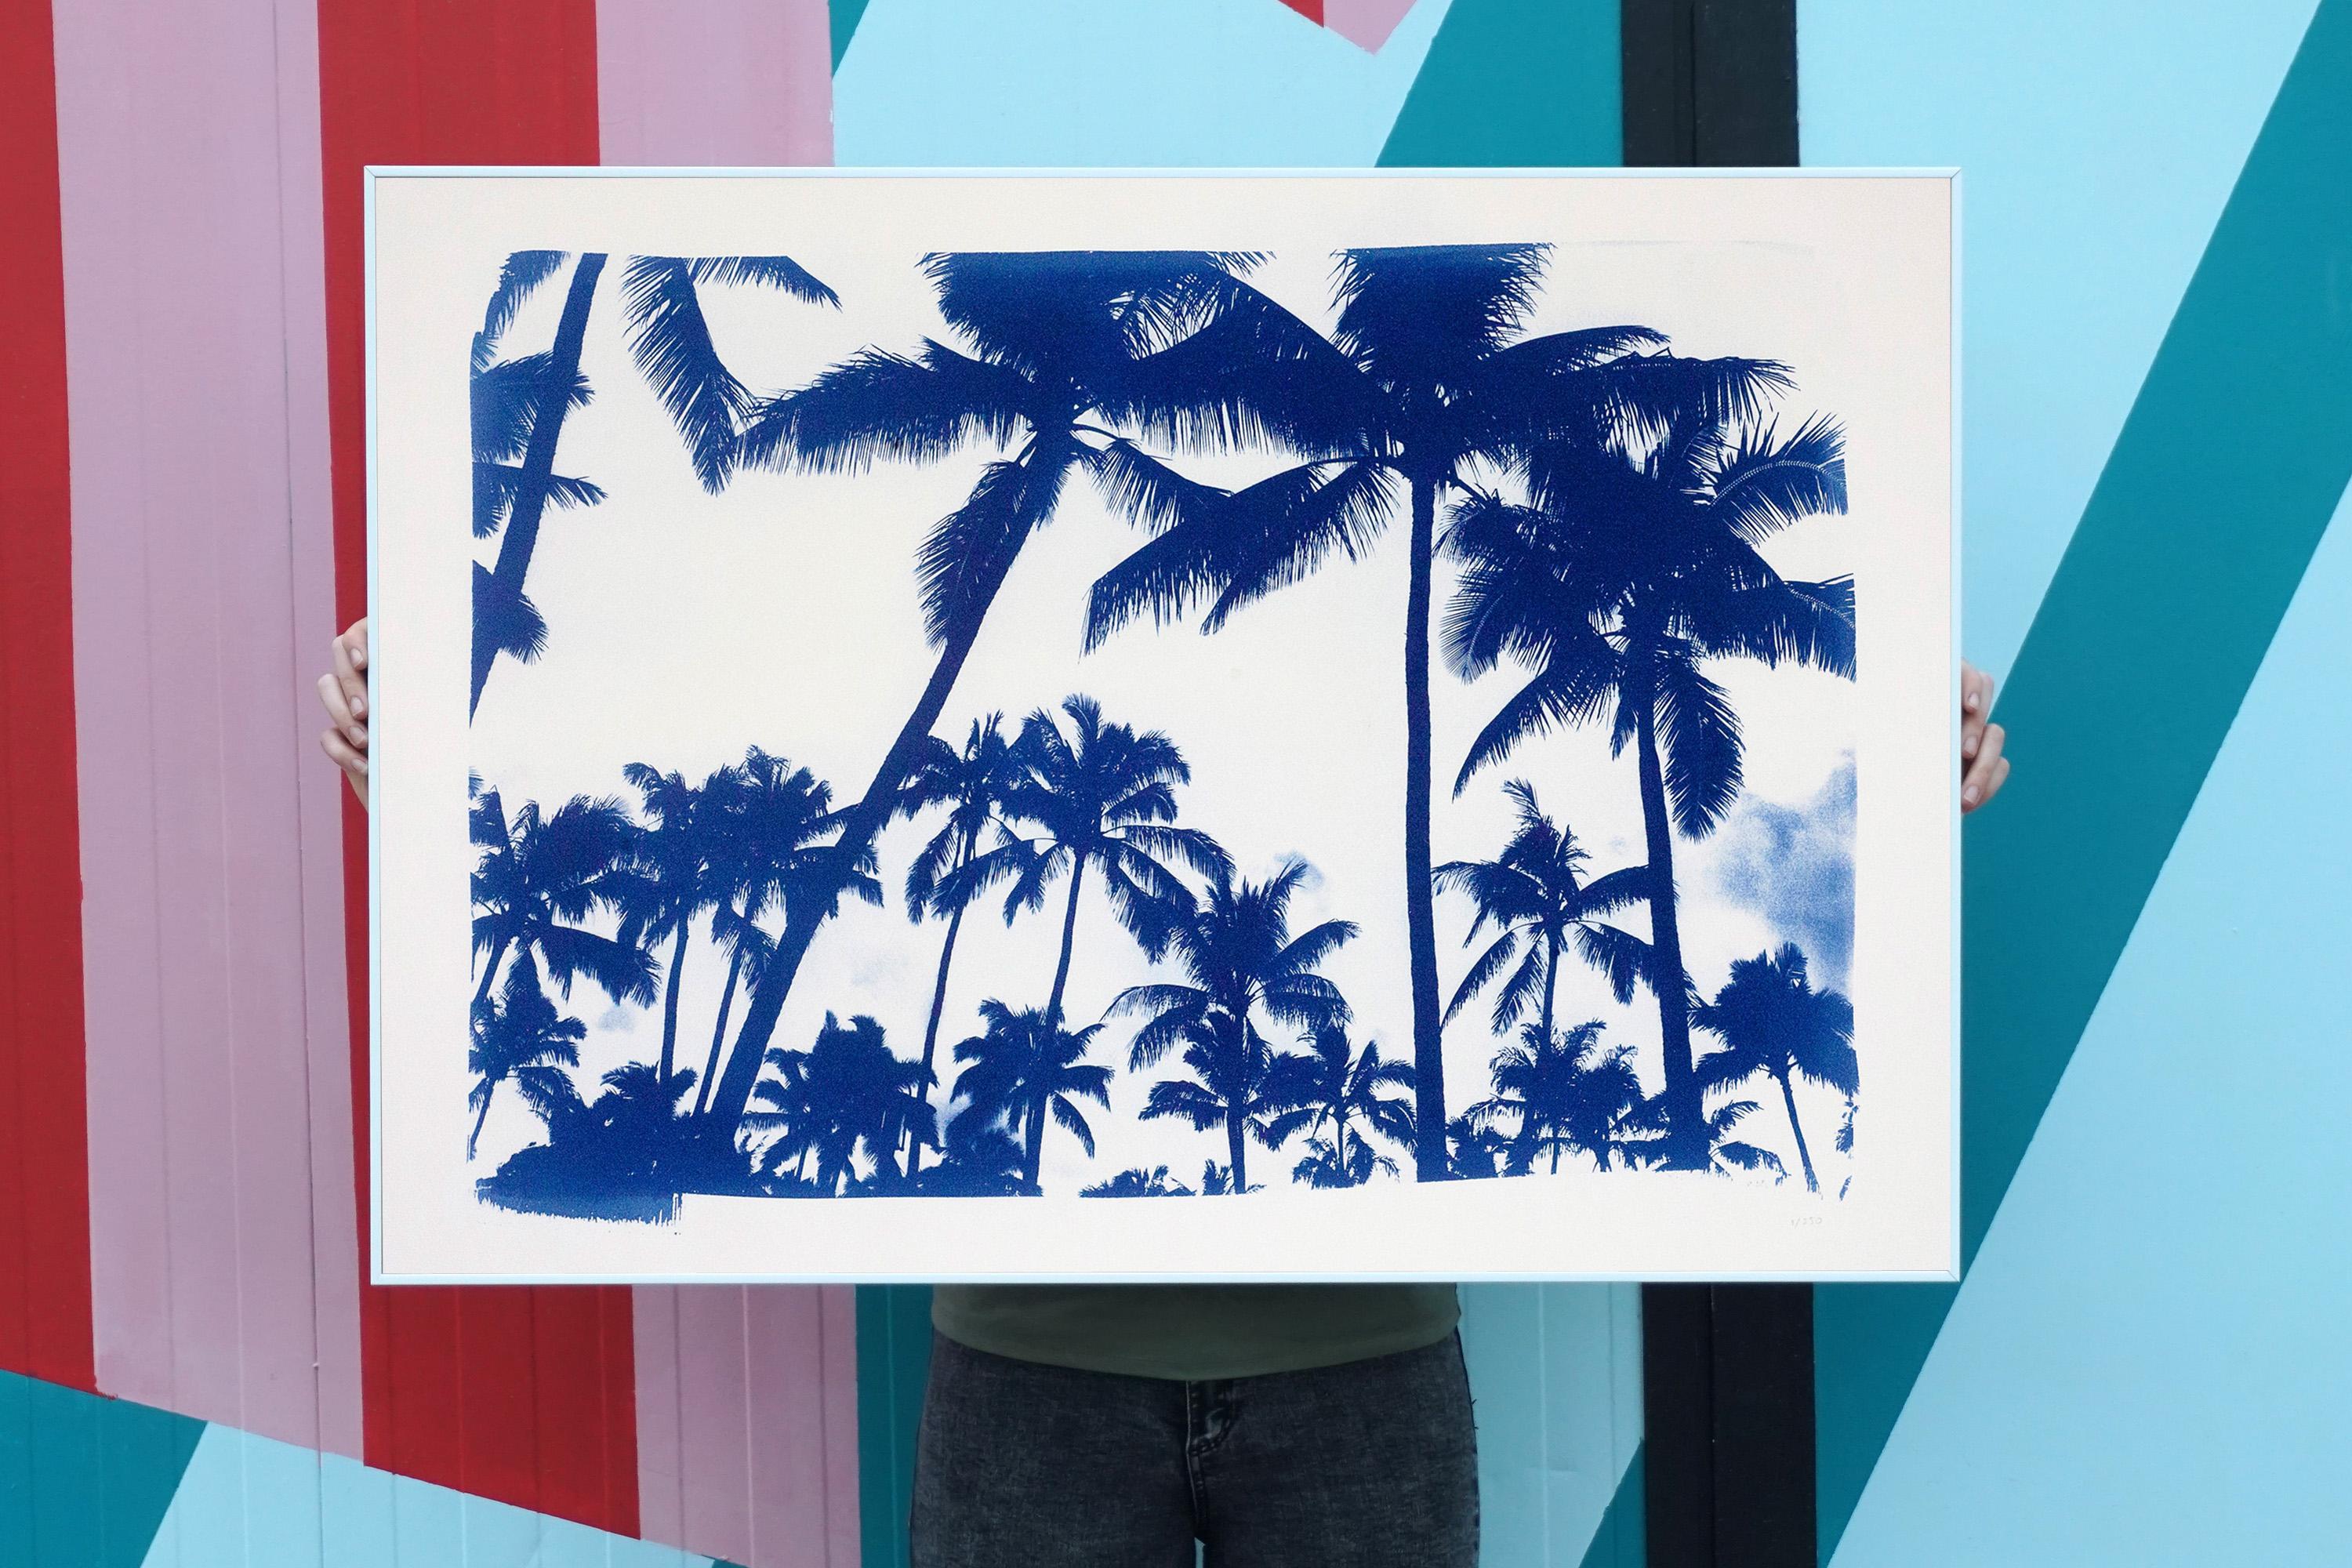 This is an exclusive handprinted limited edition cyanotype.
This image is of a coastal landscape showing the silhouettes of palm trees on an Acapulco beach.

Details:
+ Title: Acapulco Palm Sunset
+ Year: 2019
+ Edition Size: 50
+ Stamped and